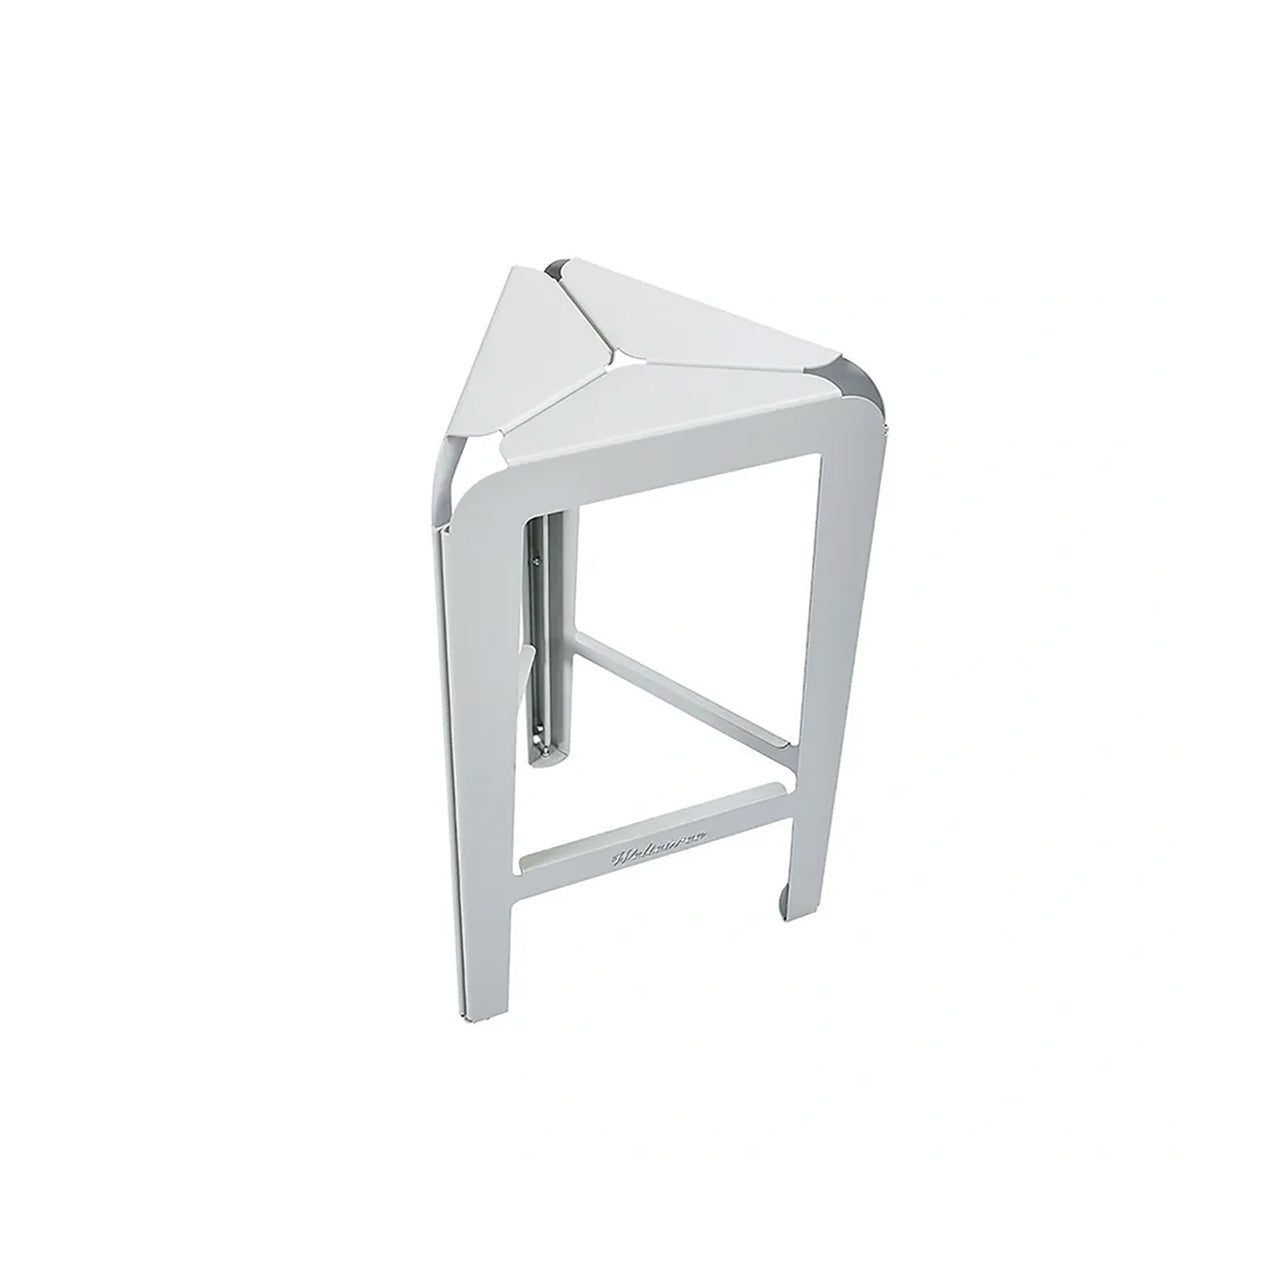 Bended Stool: High